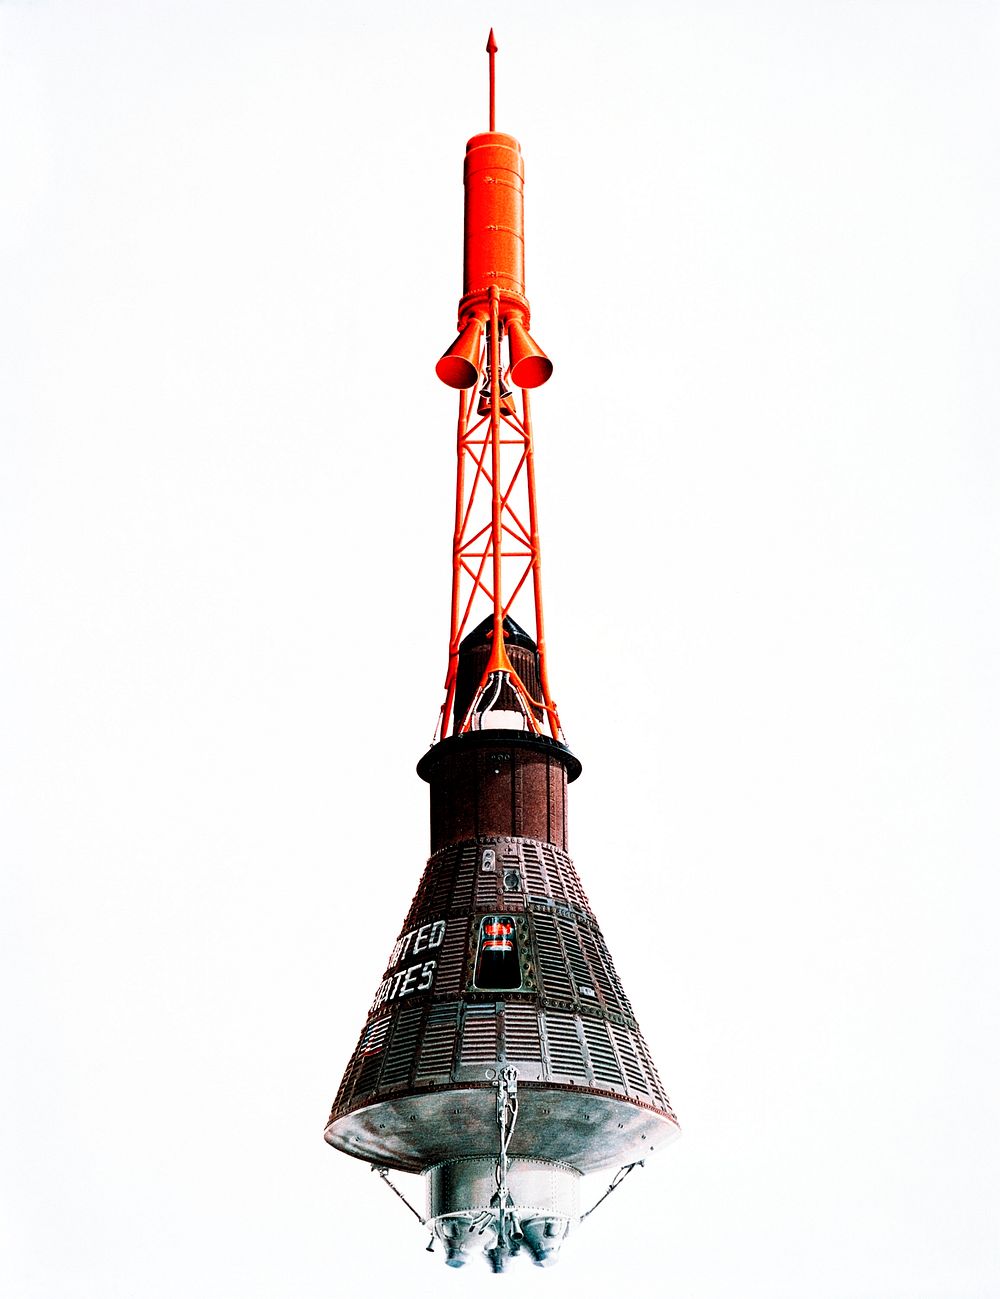 Artist concept of the Mercury capsule with its launch escape system. Original from NASA. Digitally enhanced by rawpixel.